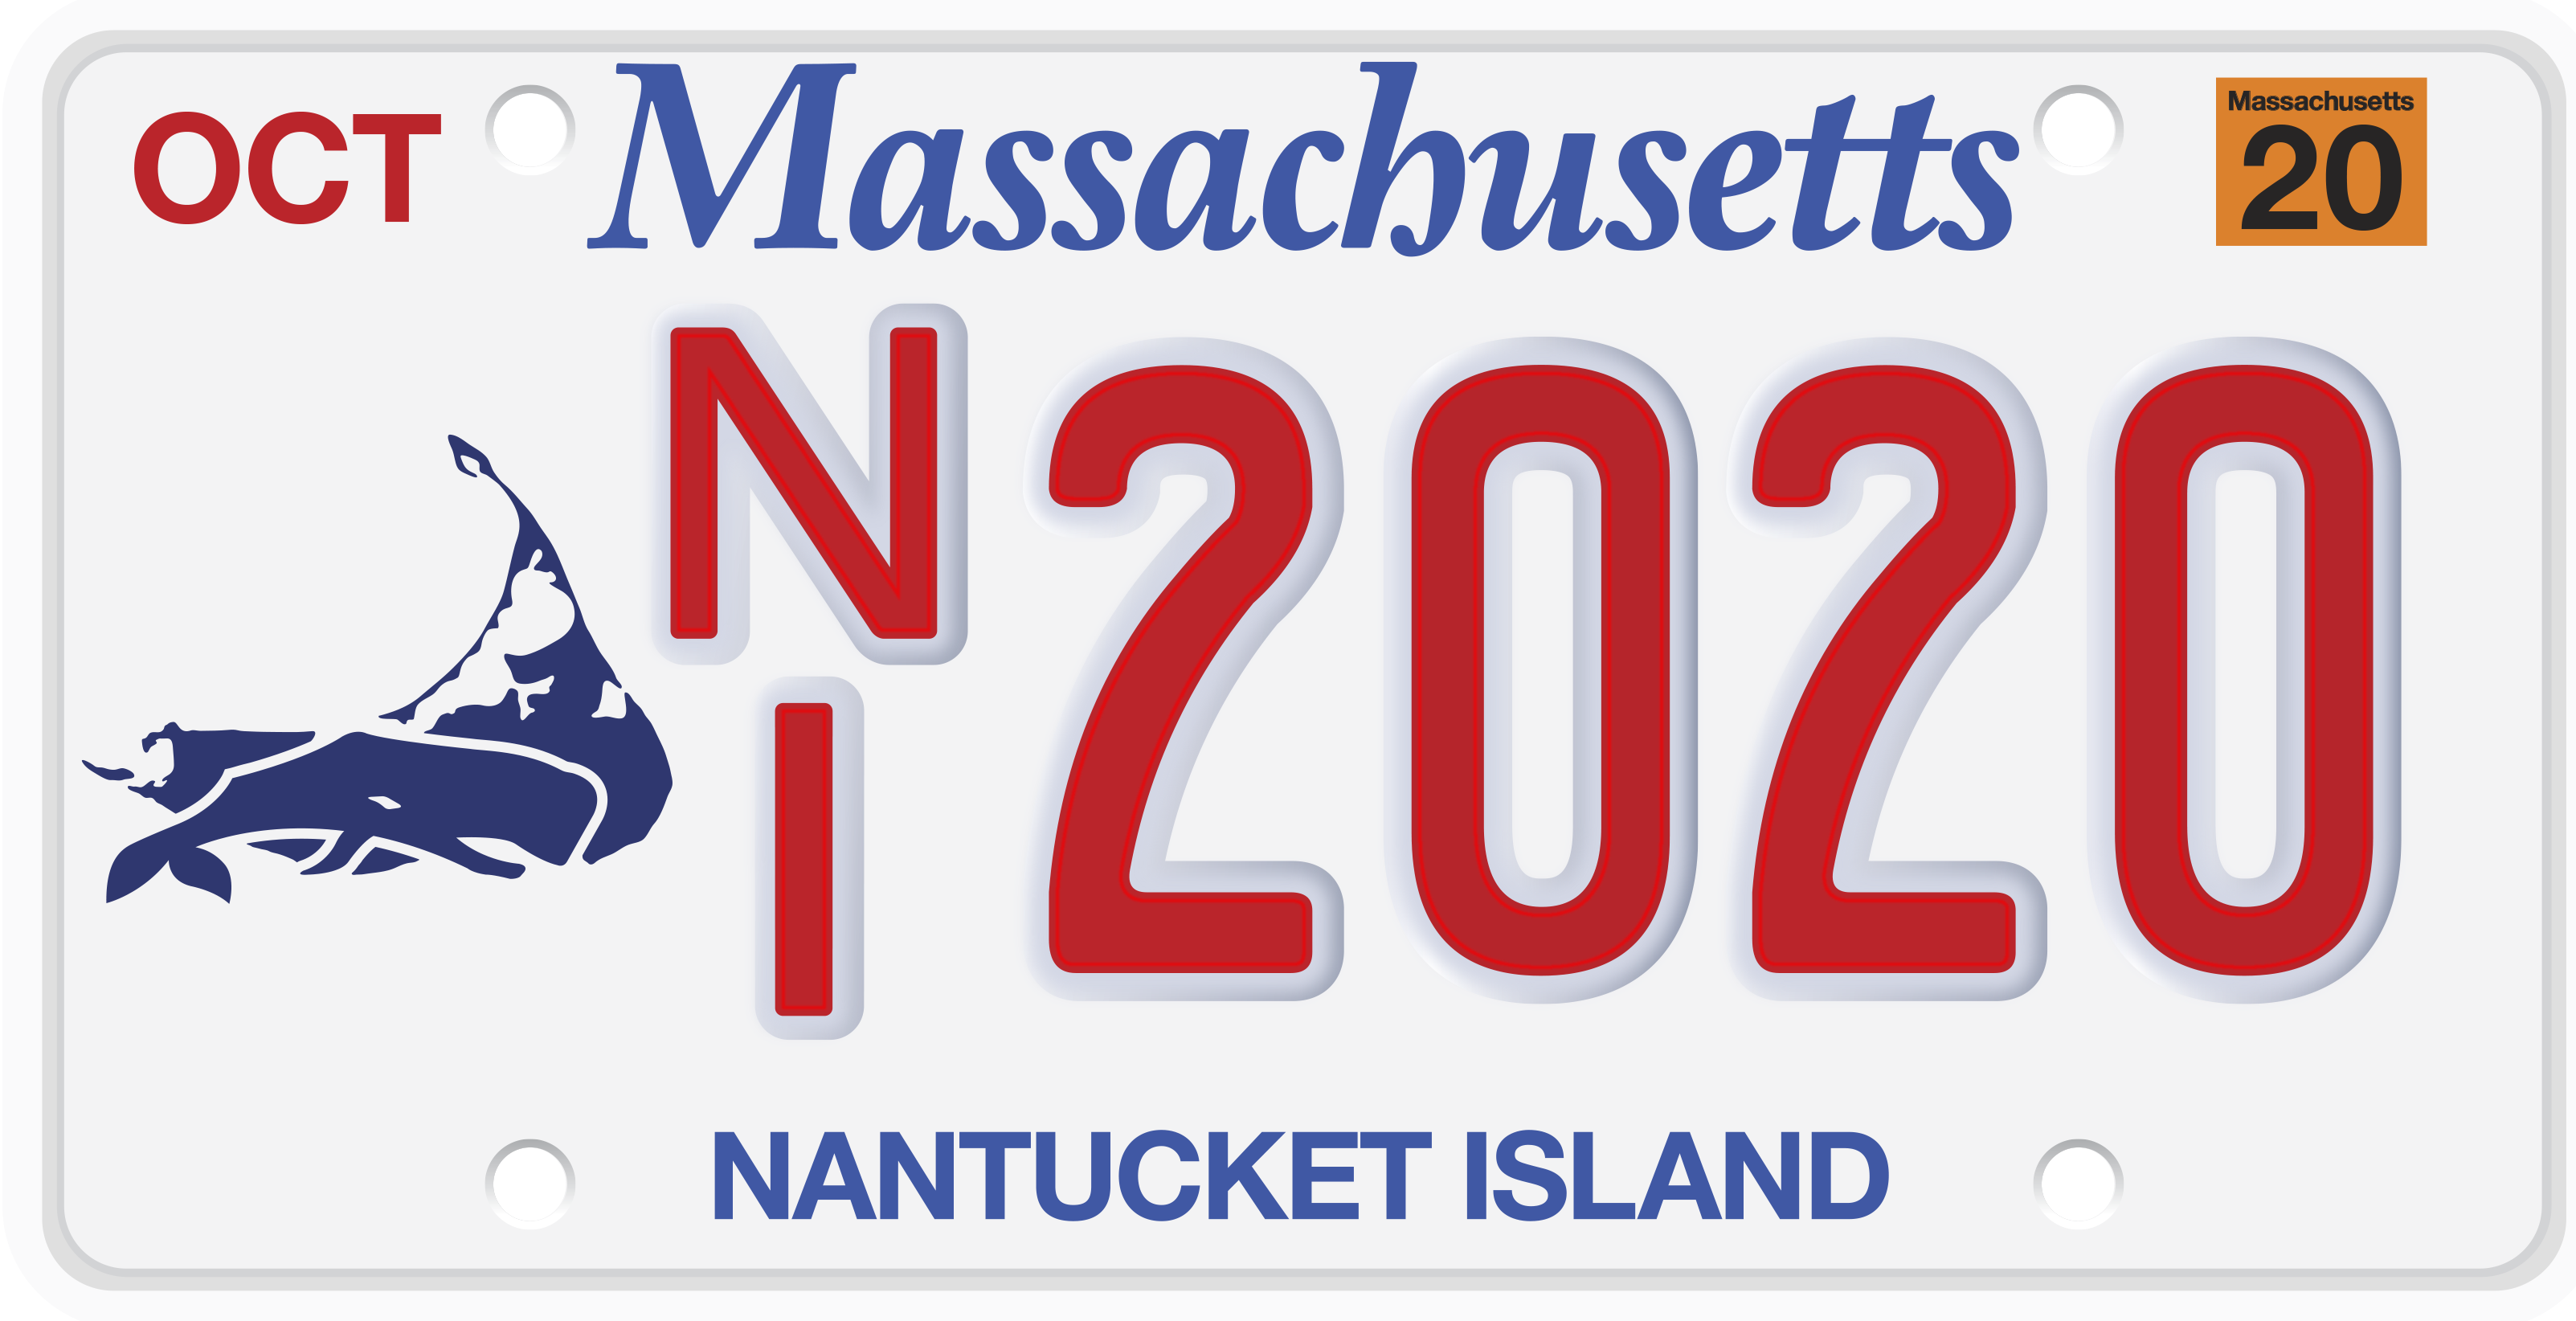 The Nantucket License Plate